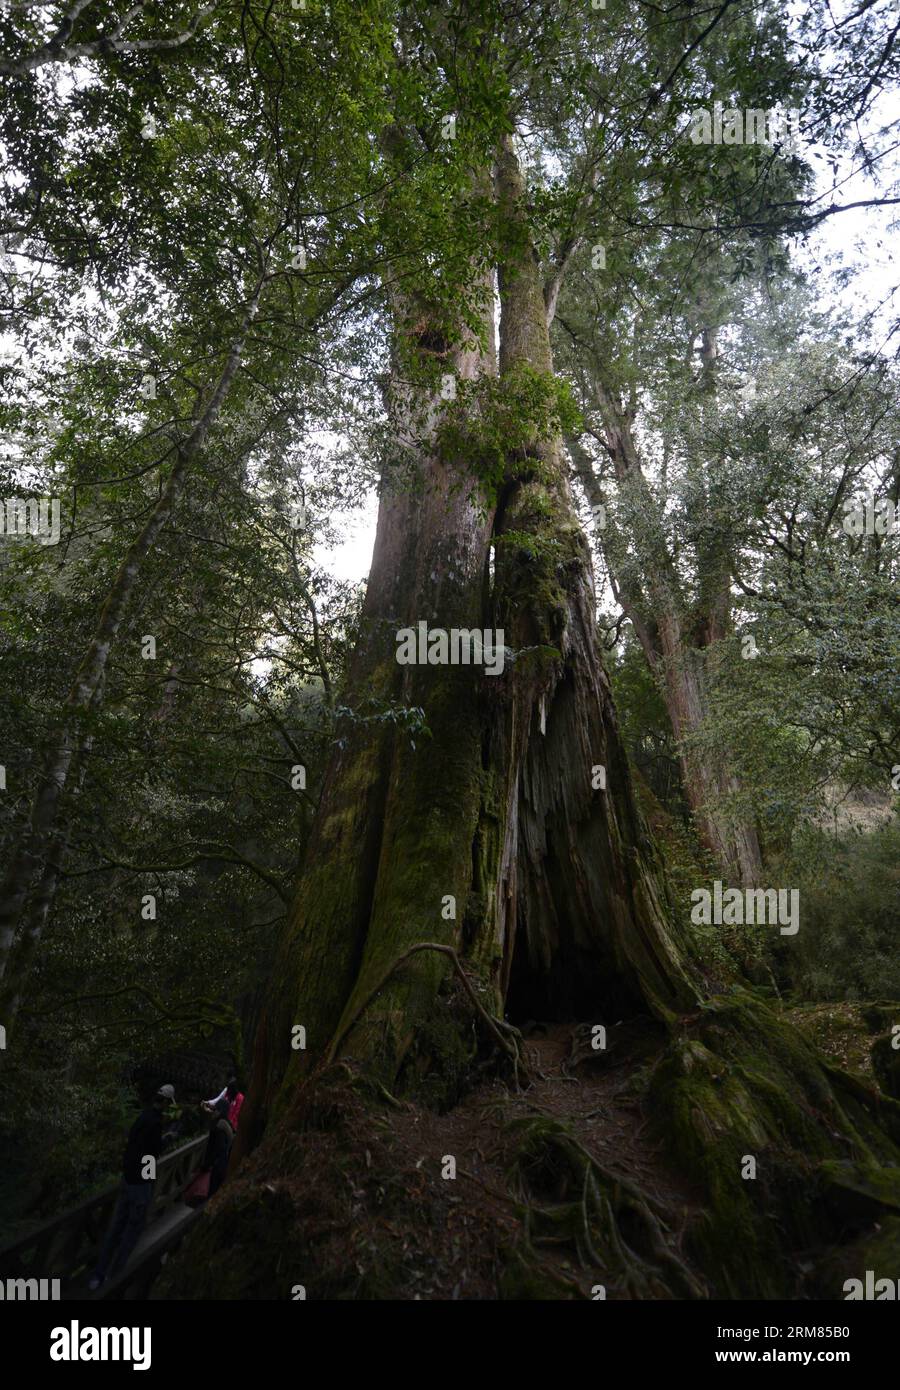 (140328) -- CHIAYI, March 28, 2014 (Xinhua) -- Tourists visit a Formosan cypress forest in the Ali Mountain in Chiayi County, southeast China s Taiwan, March 28, 2014. The Ali Mountain in central Taiwan is home to an abundance of Formosan cypresses (Chamaecyparis formosensis), which are an endemic species. During Taiwan s Japanese occupation period (1895-1945), the Formosan cypresses of the Ali Mountain were shipped to Japan in substantial amounts for architectural use. Still, a considerable number of them outlived the Japanese looting and natural disasters. (Xinhua/Huang Xiaoyong) (lmm) CHINA Stock Photo